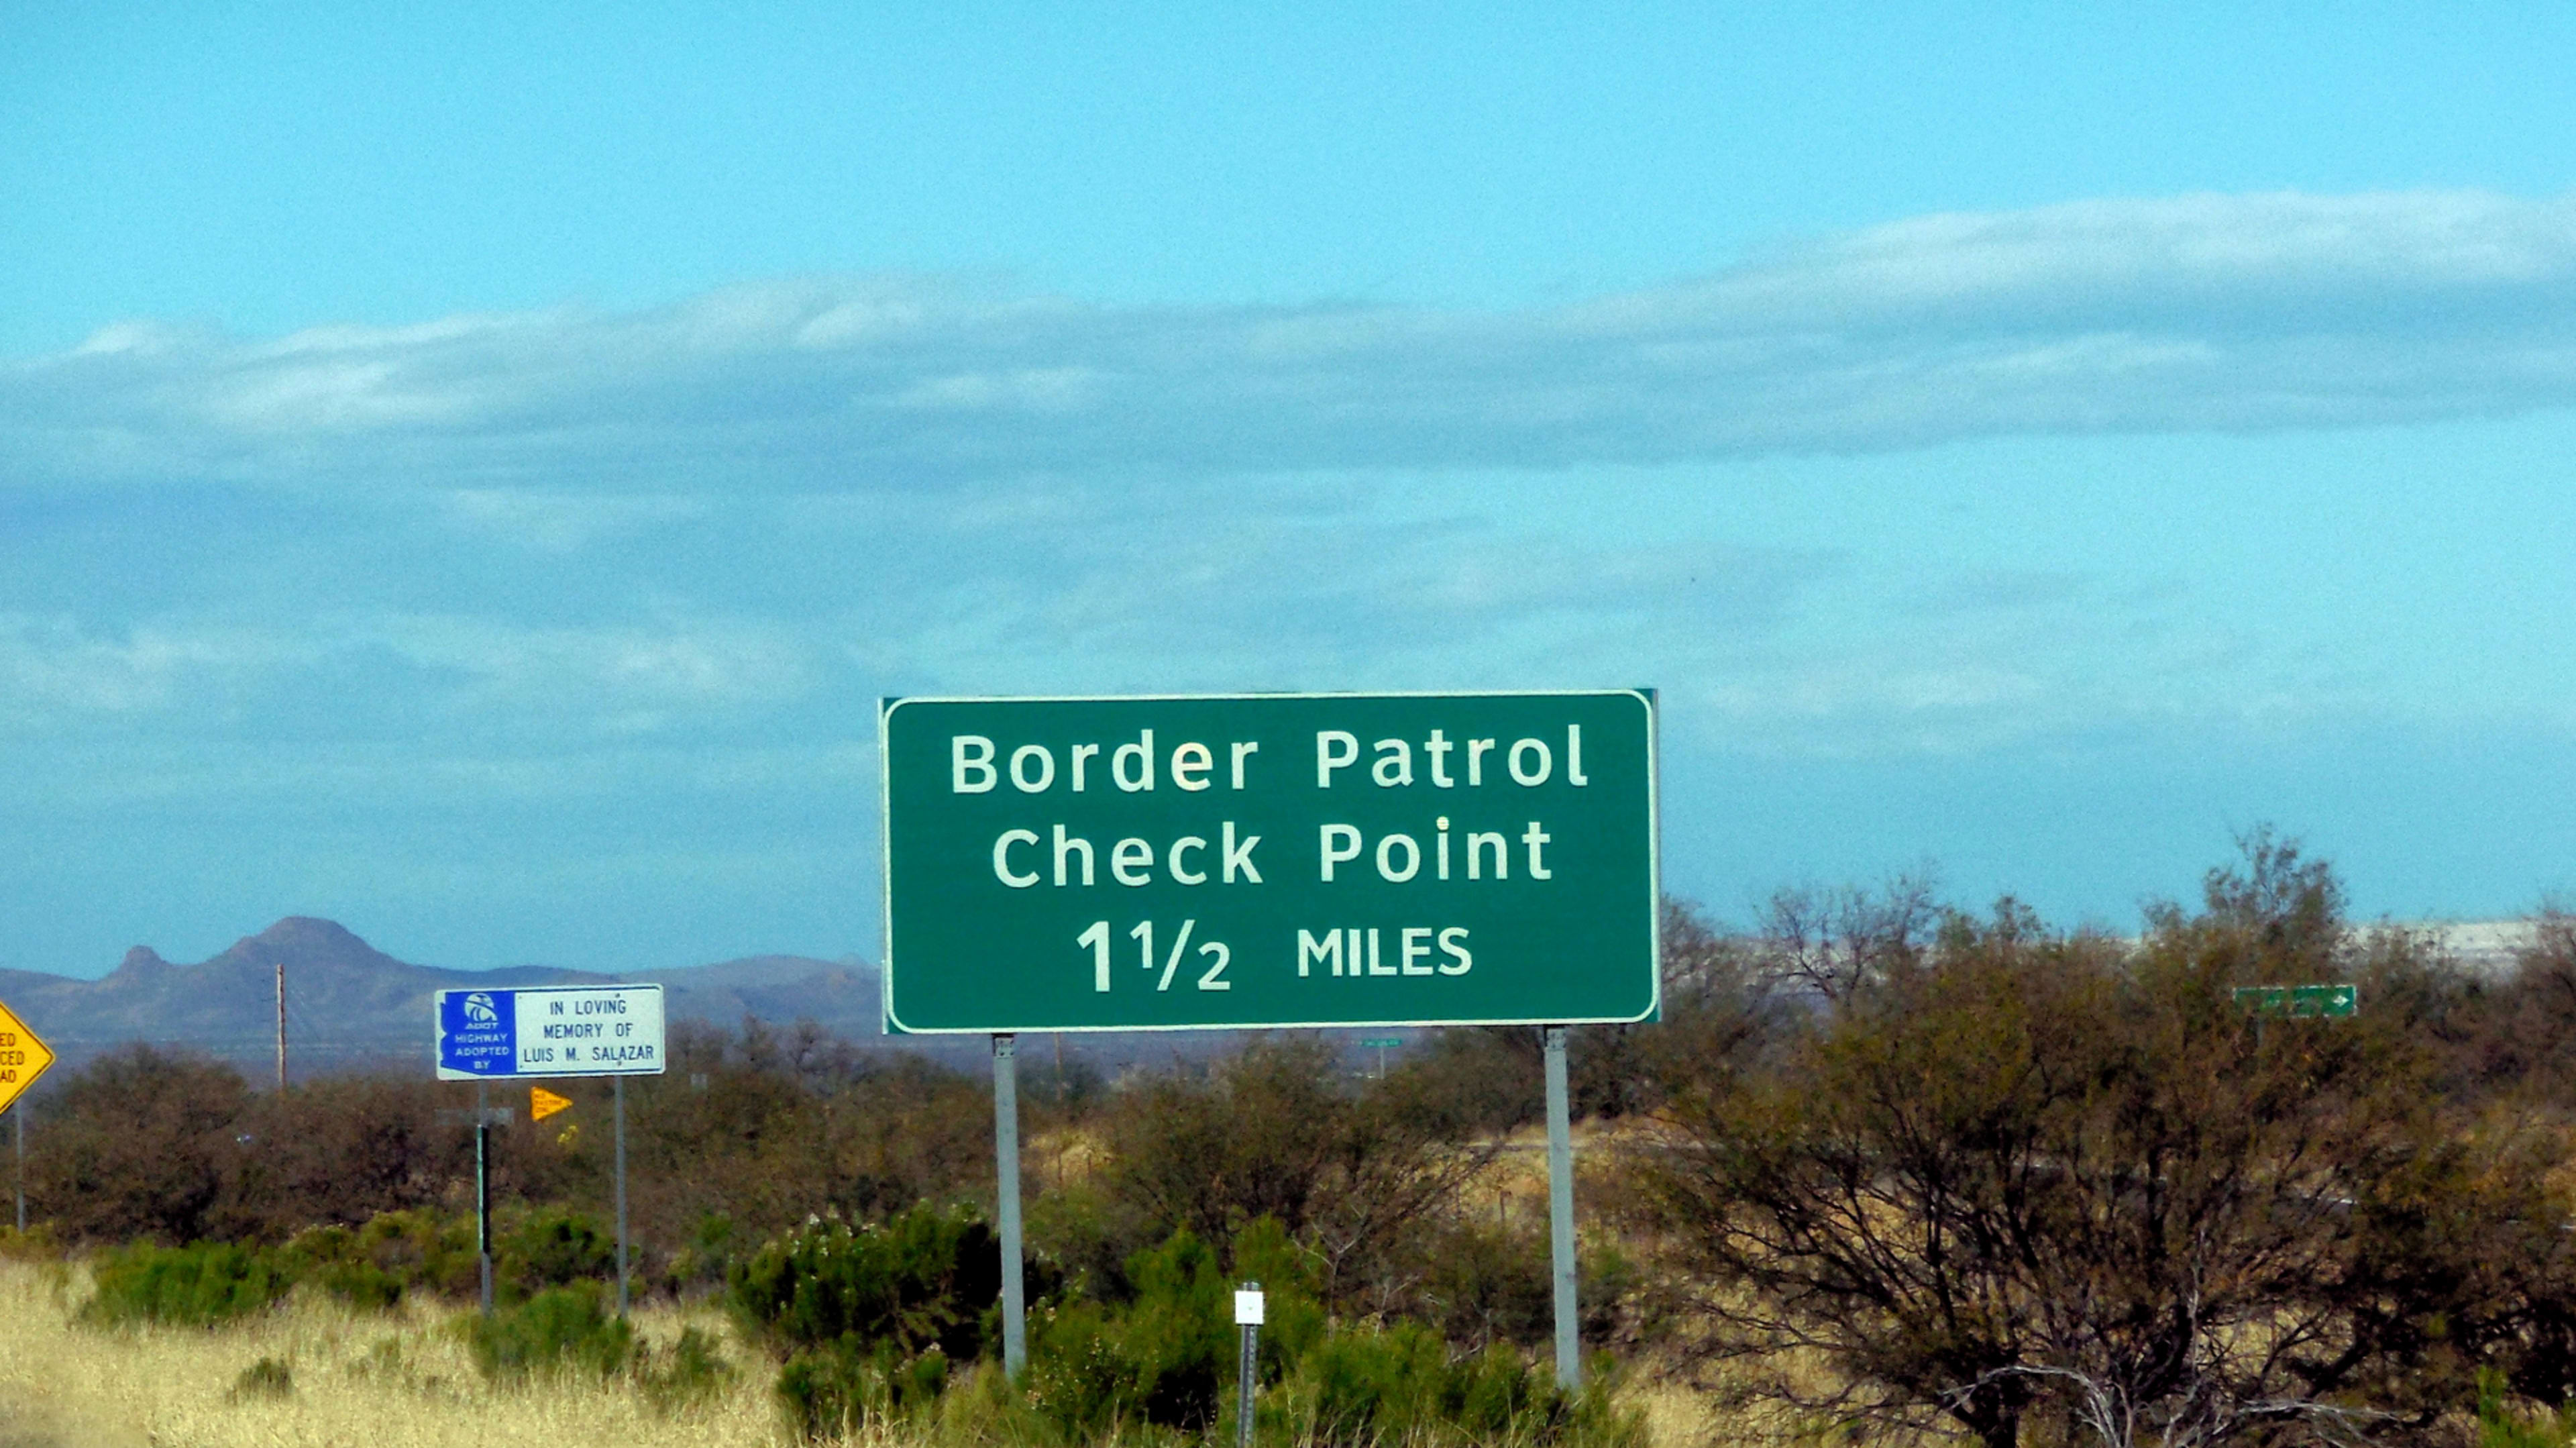 What’s on your iPhone? Device searches by U.S. border officials are skyrocketing